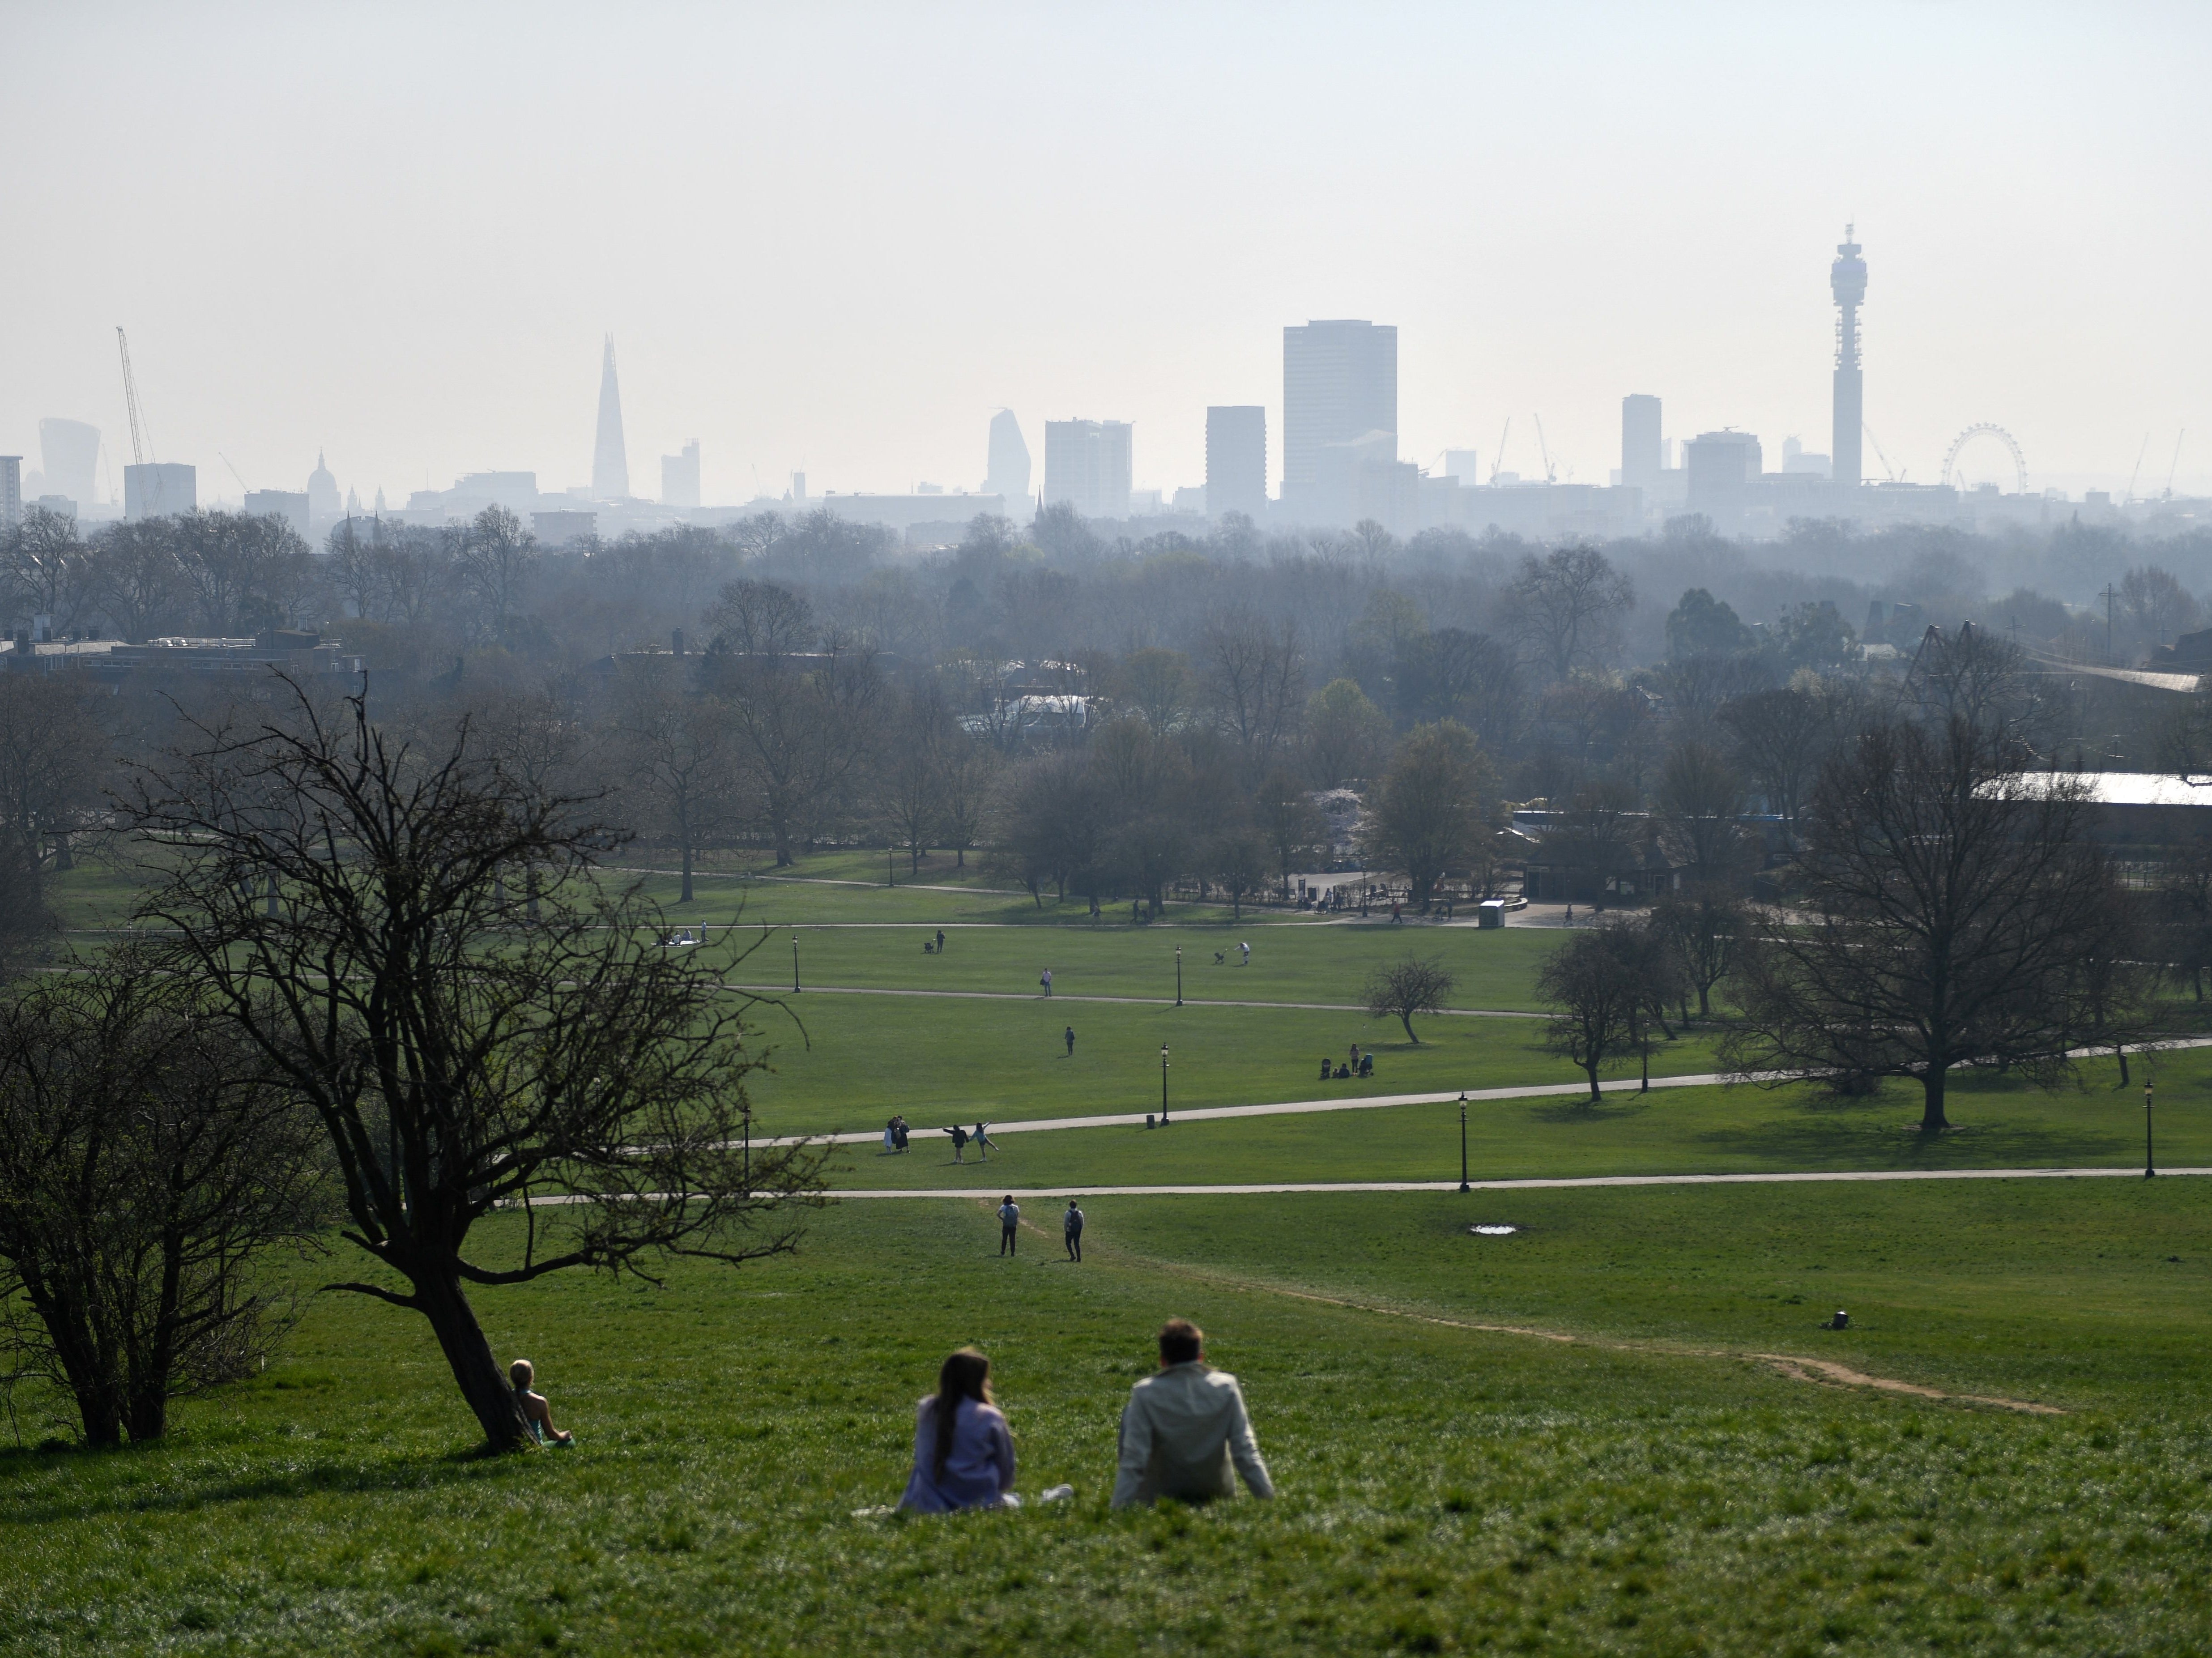 Authorities say London experienced very high pollution levels on Thursday